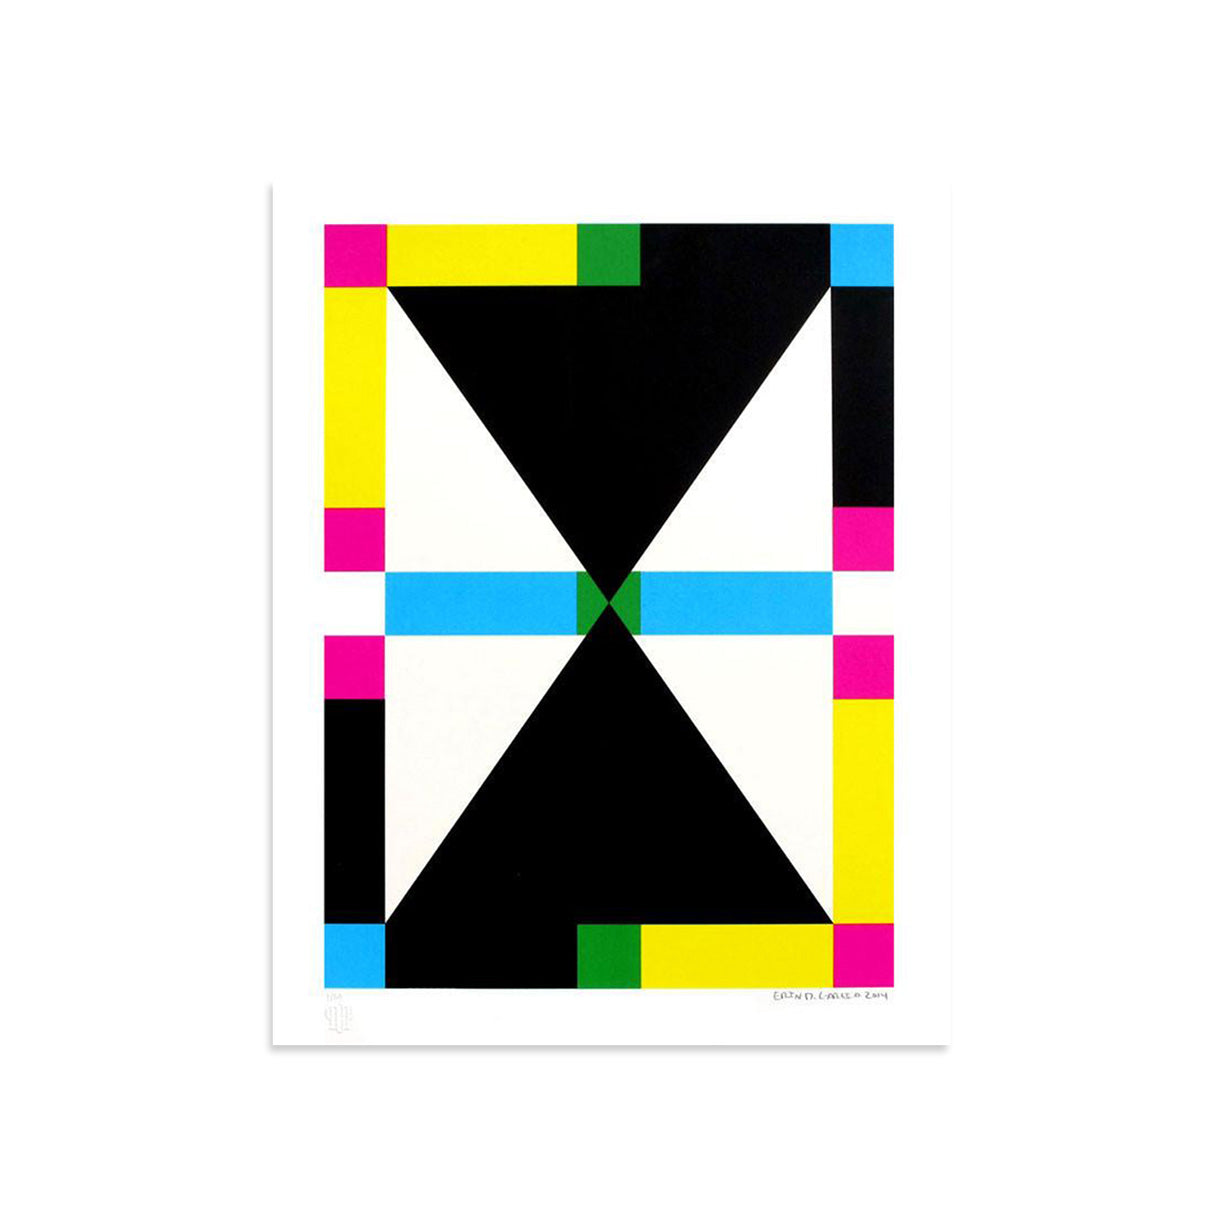 4 Shapes in 6 Colors - Color Rotation 2 by Erin D. Garcia | Print | Poster Child Prints